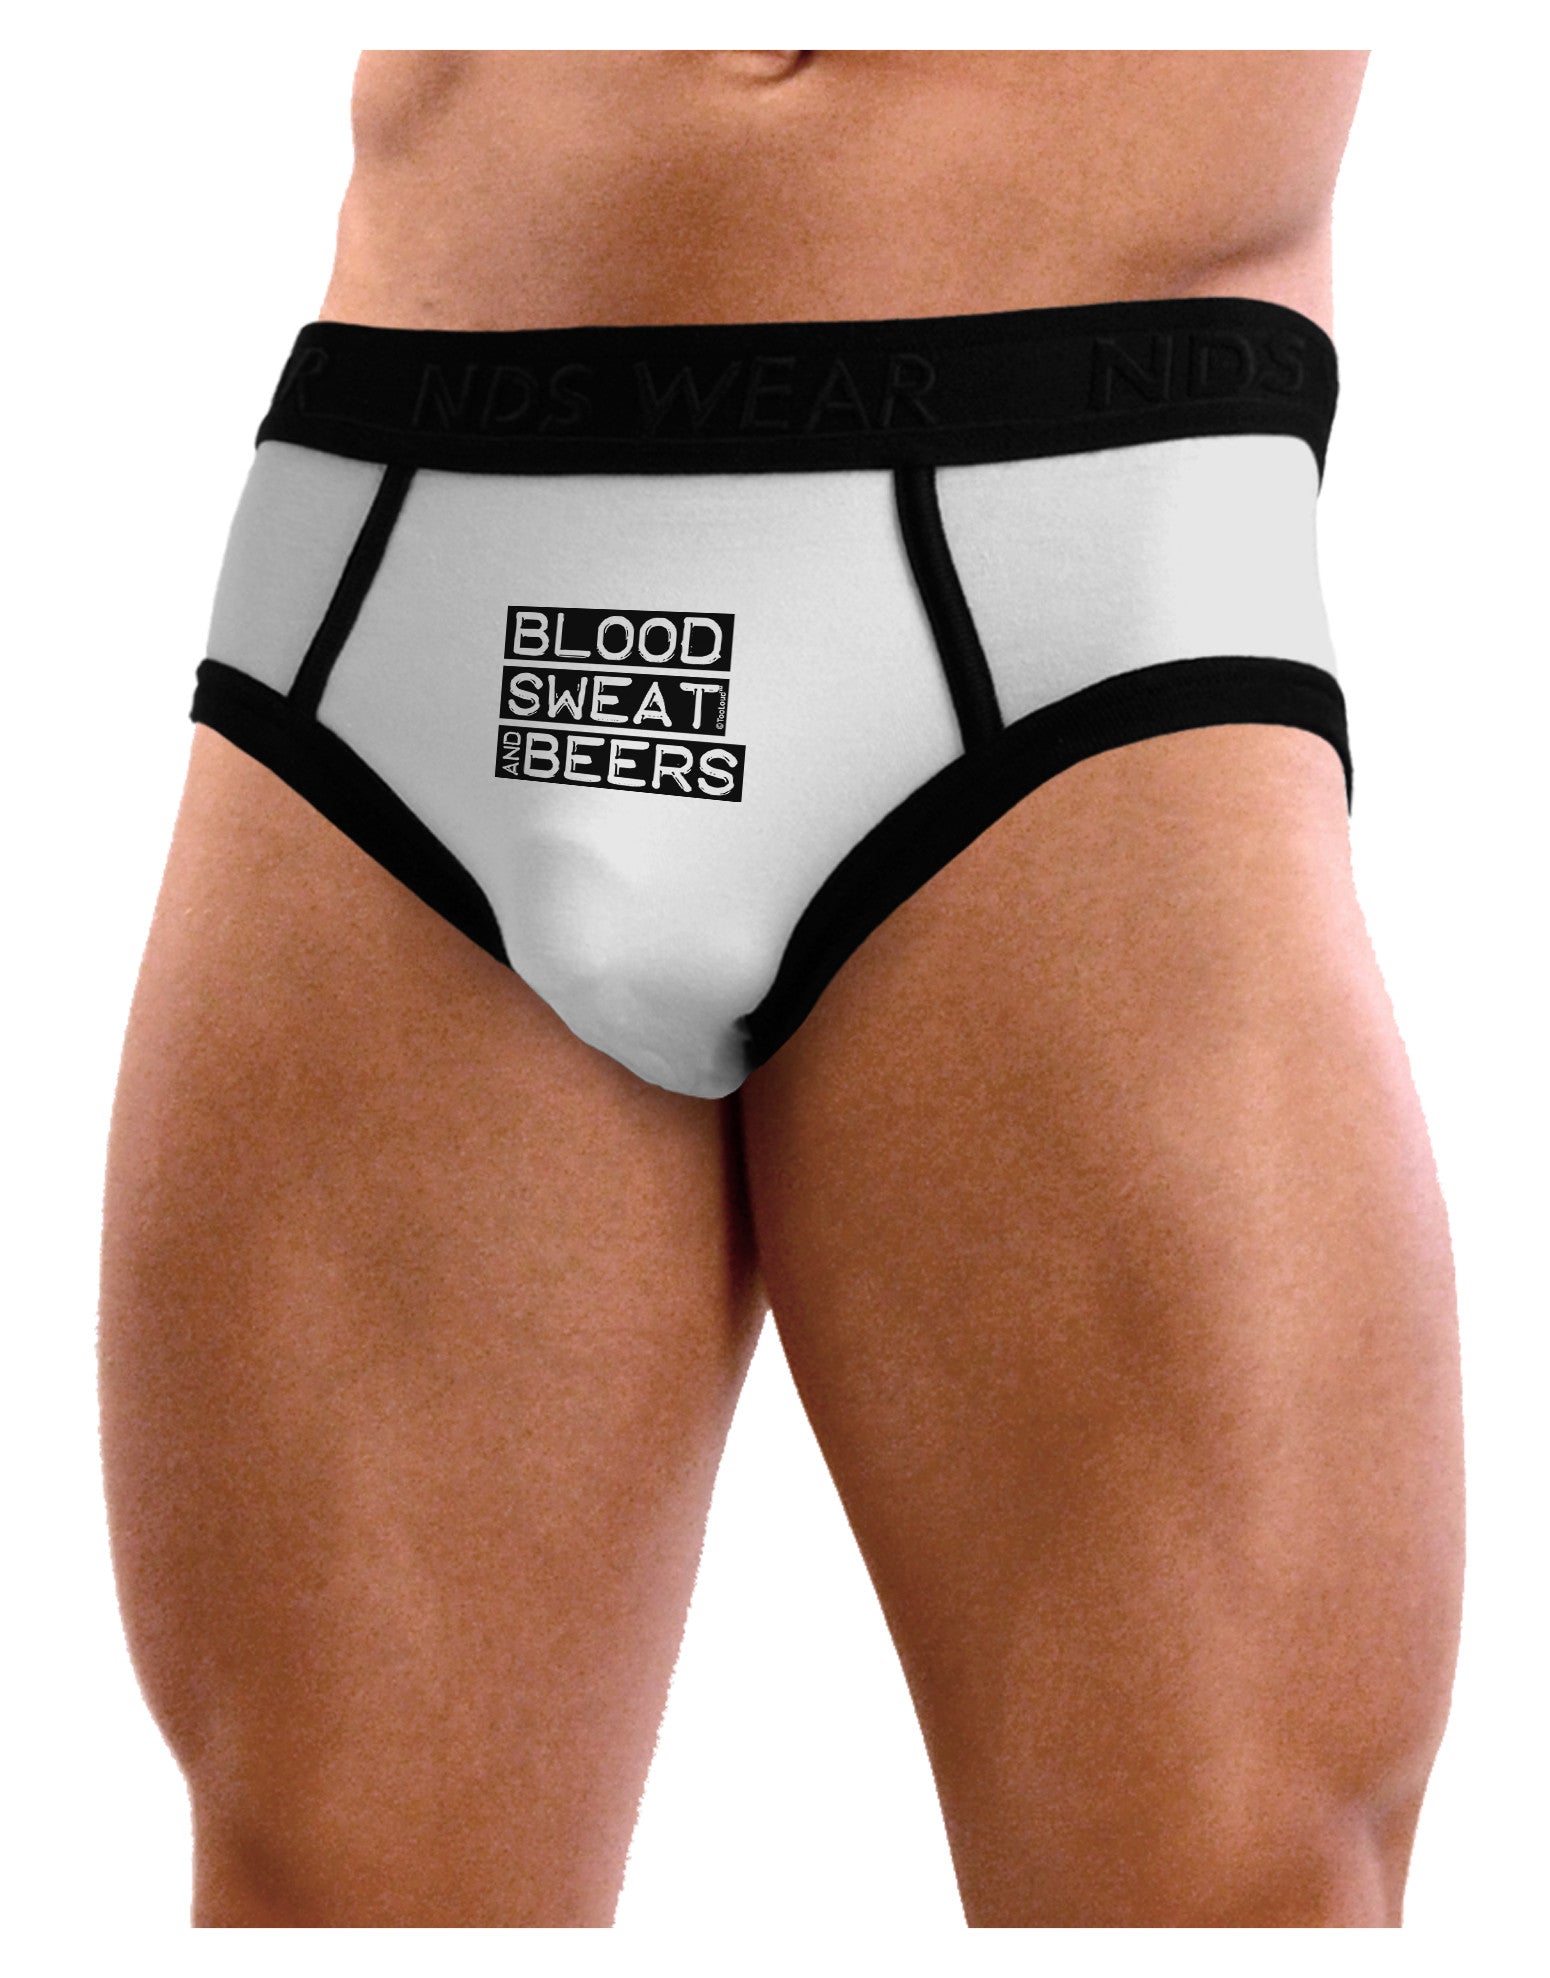 Blood Sweat and Beers Design Mens NDS Wear Briefs Underwear by